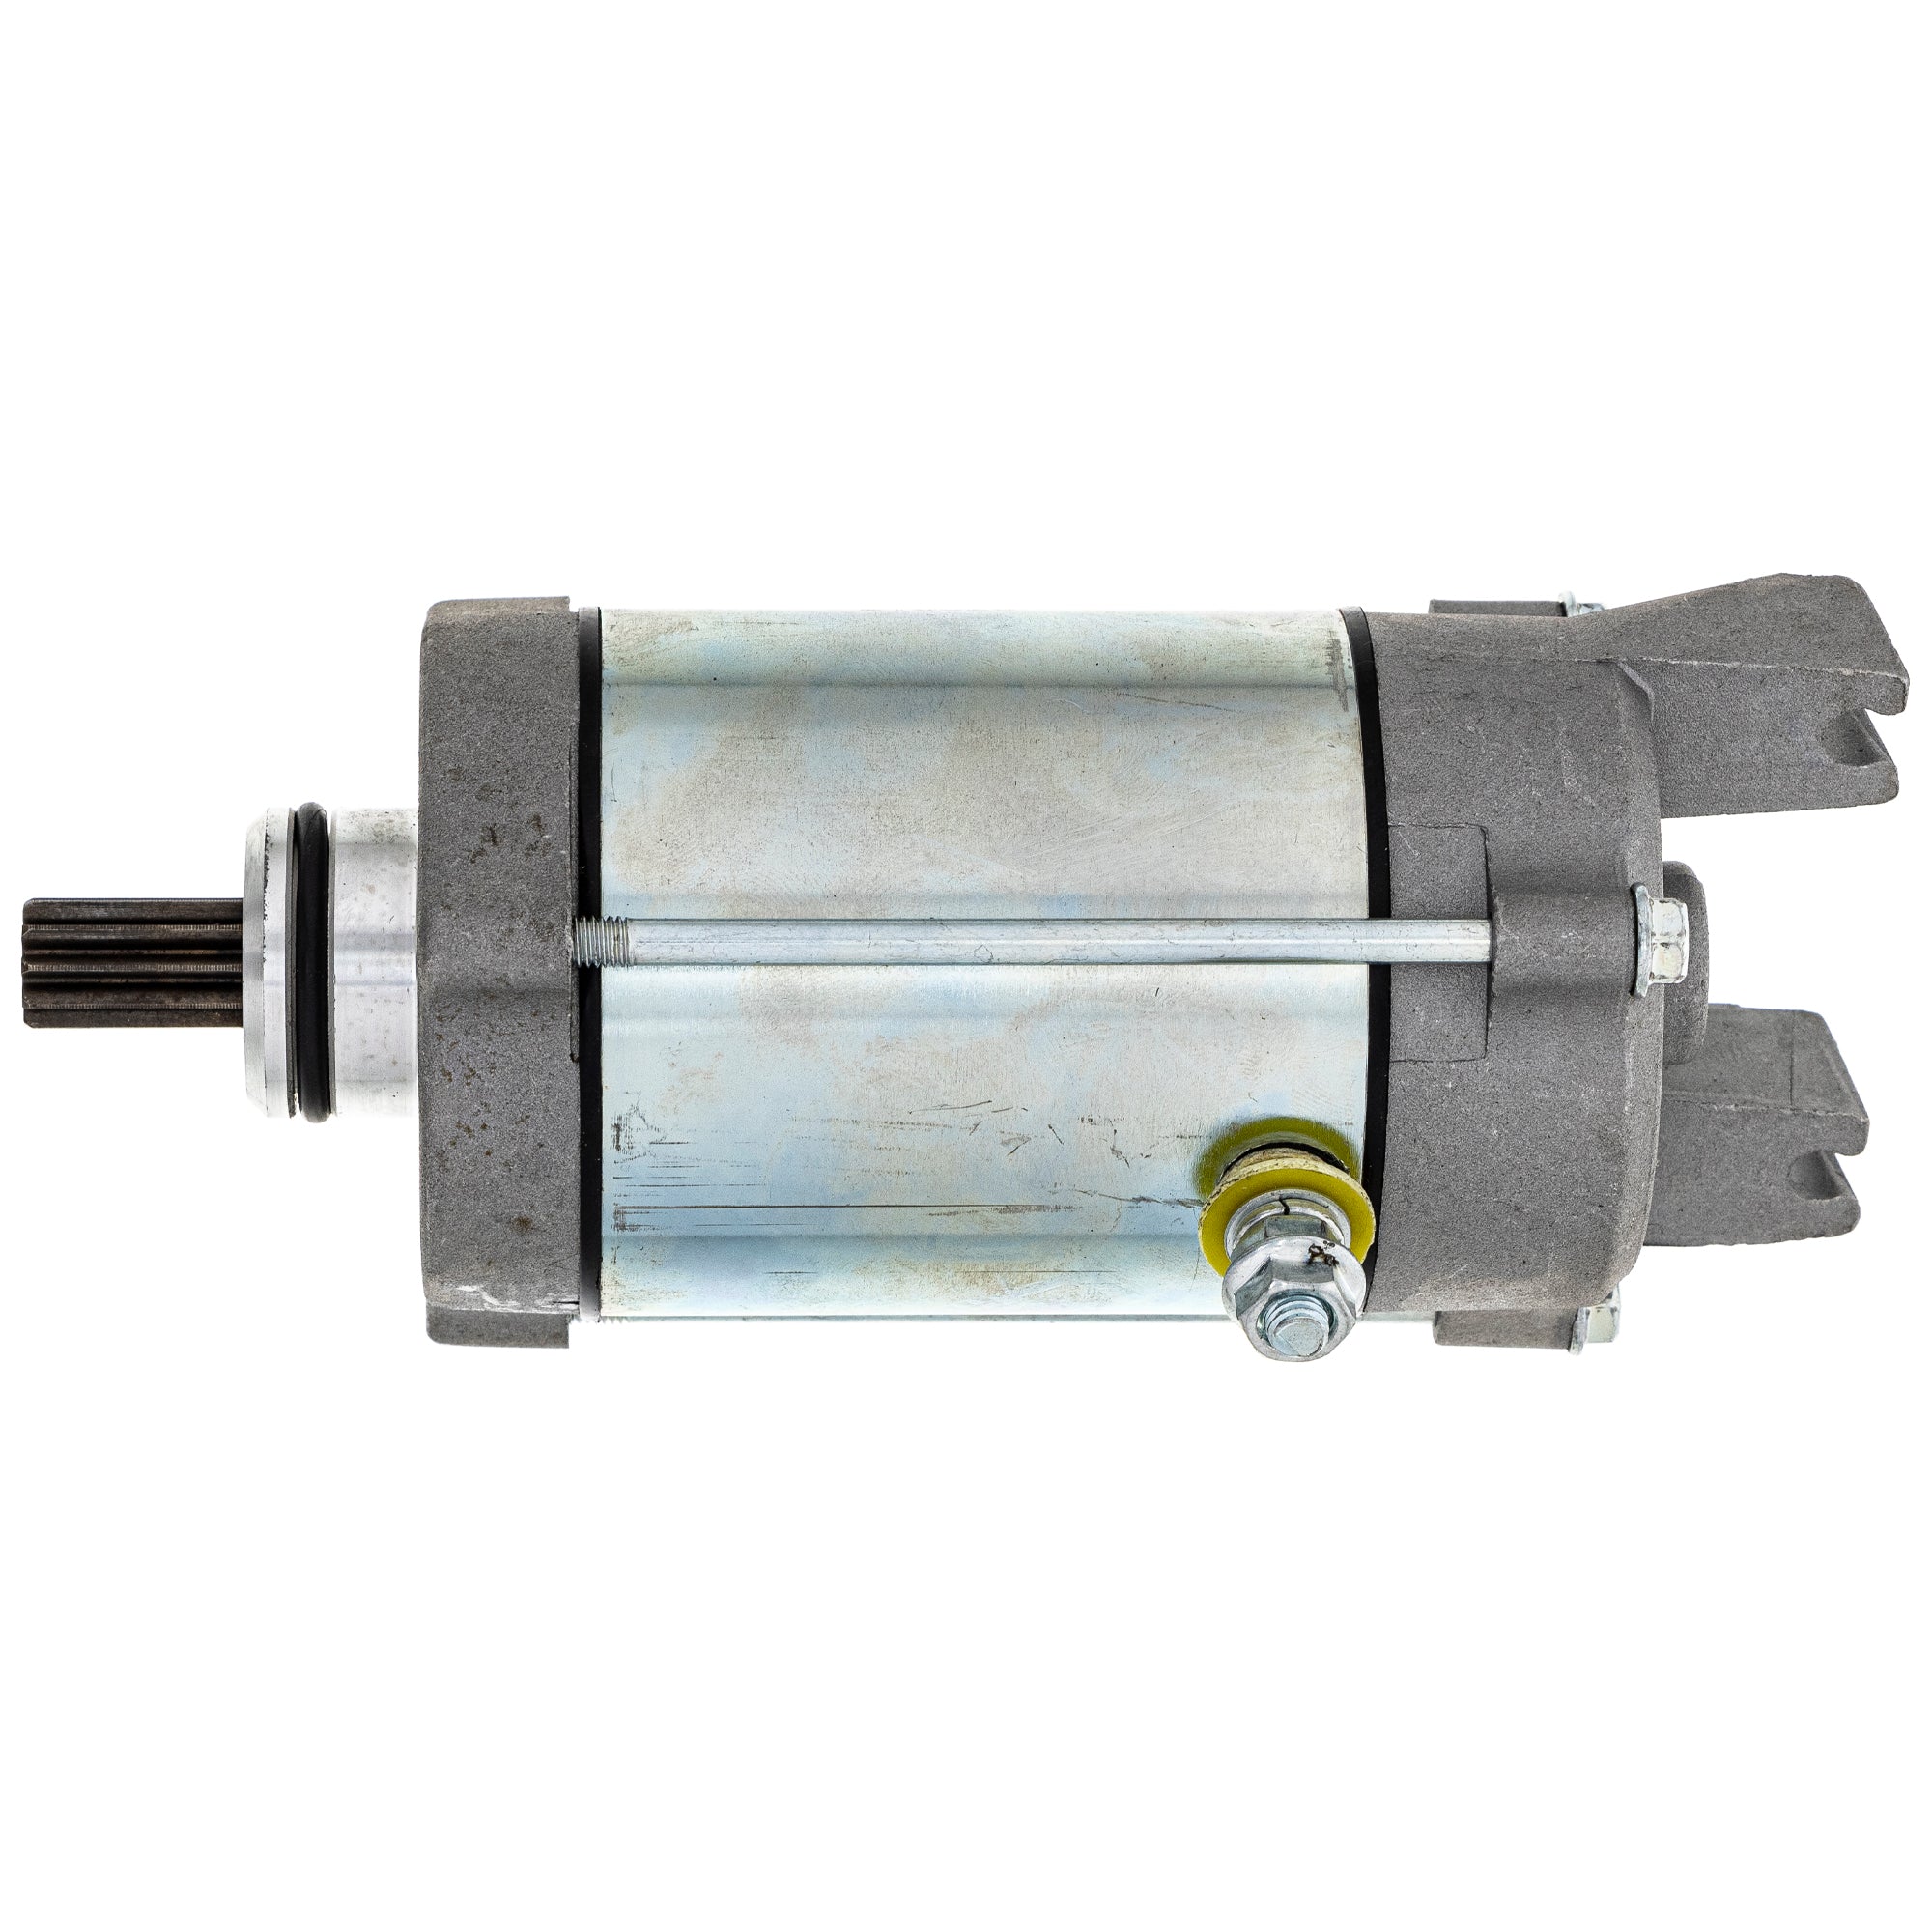 NICHE 519-CSM2362O Starter Motor Assembly for zOTHER Shadow Pacific